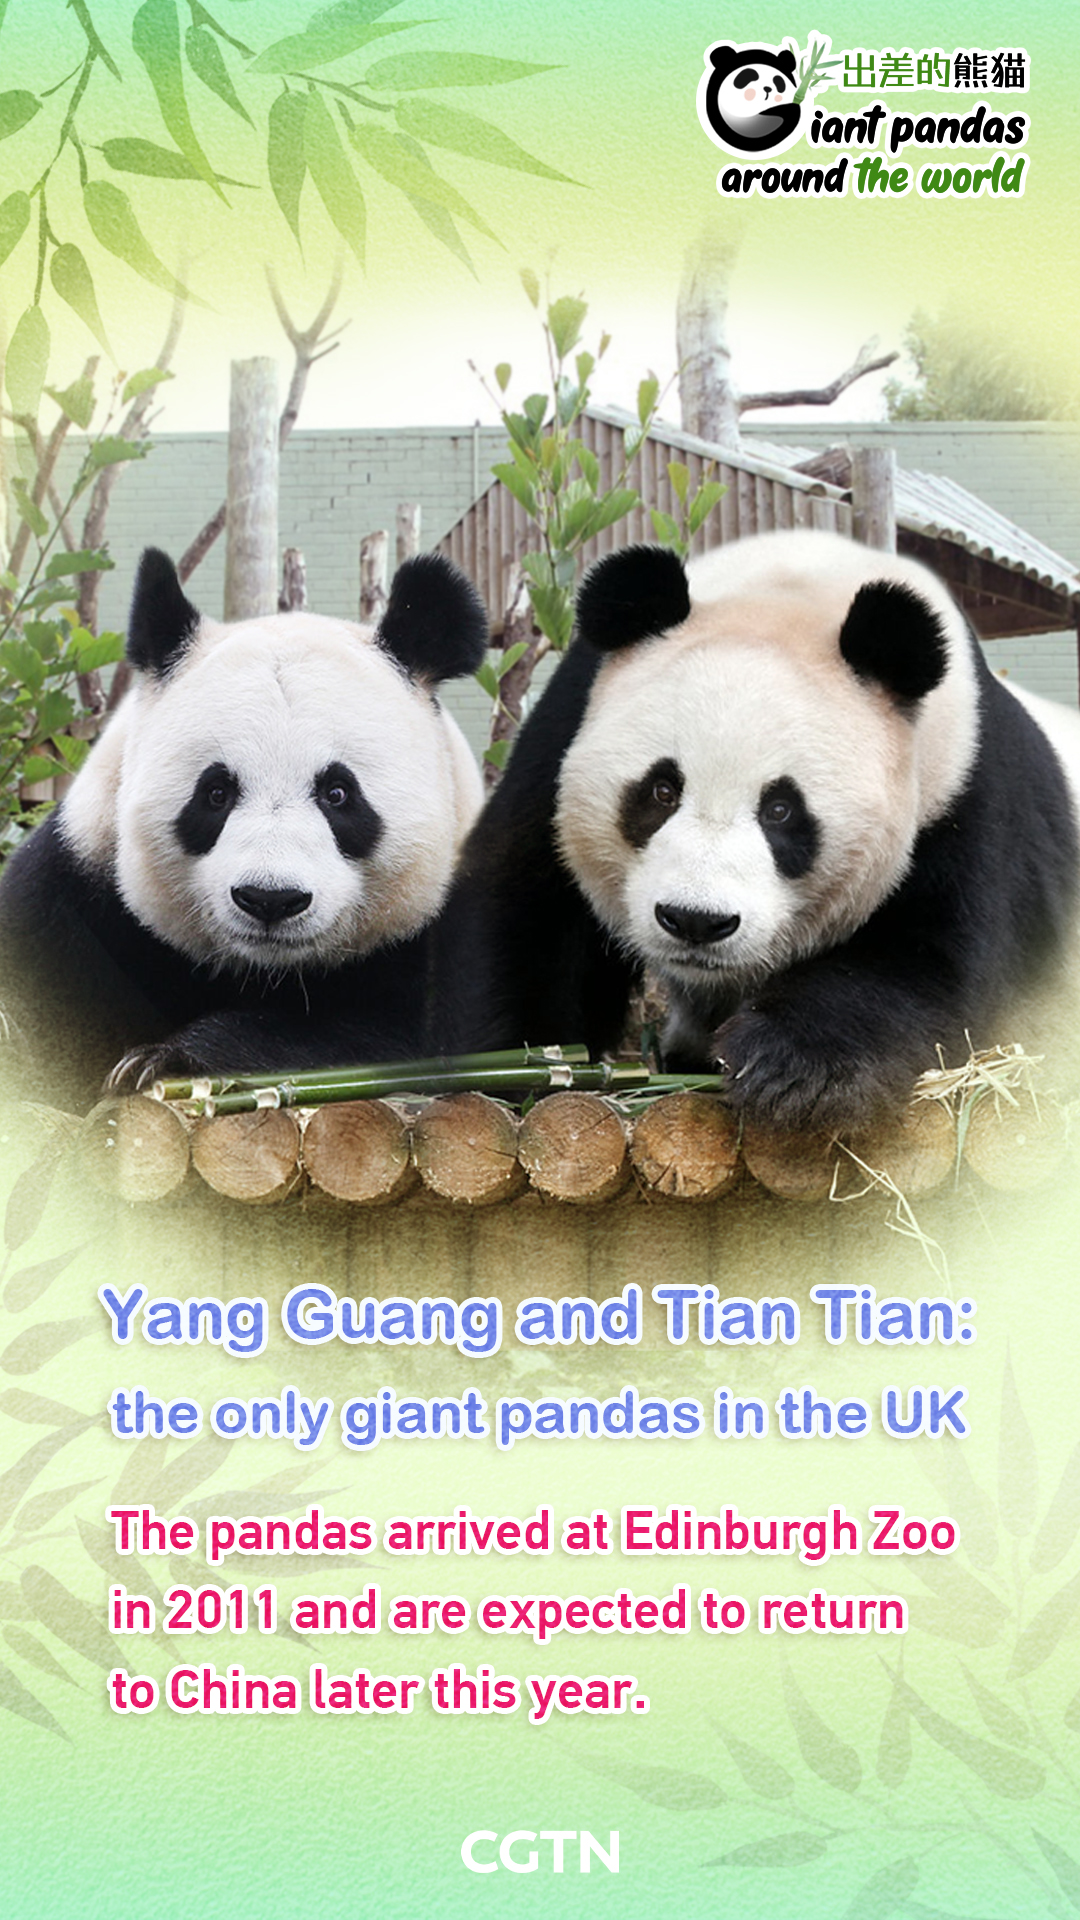 UK's only giant pandas set to head back home